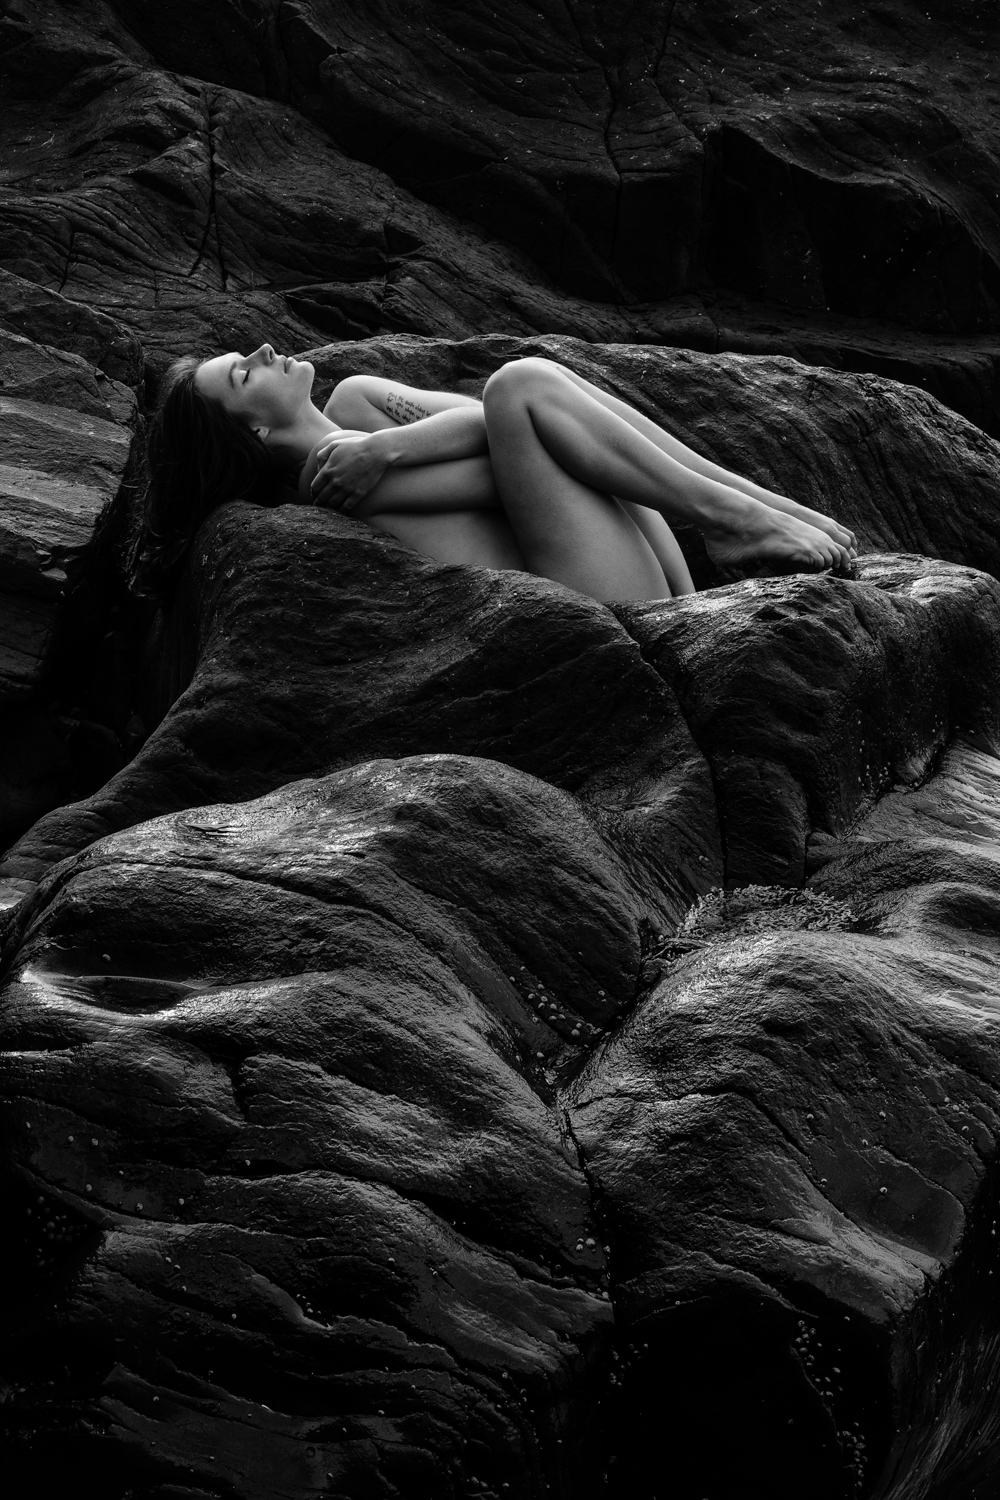 One of my favourite shots from the Tassie workshop - the gorgeous @sasskia.model emerging from her rock womb on the shores of Spiky Beach. I just love the texture and shapes of the incredible rock formation enveloping her body.